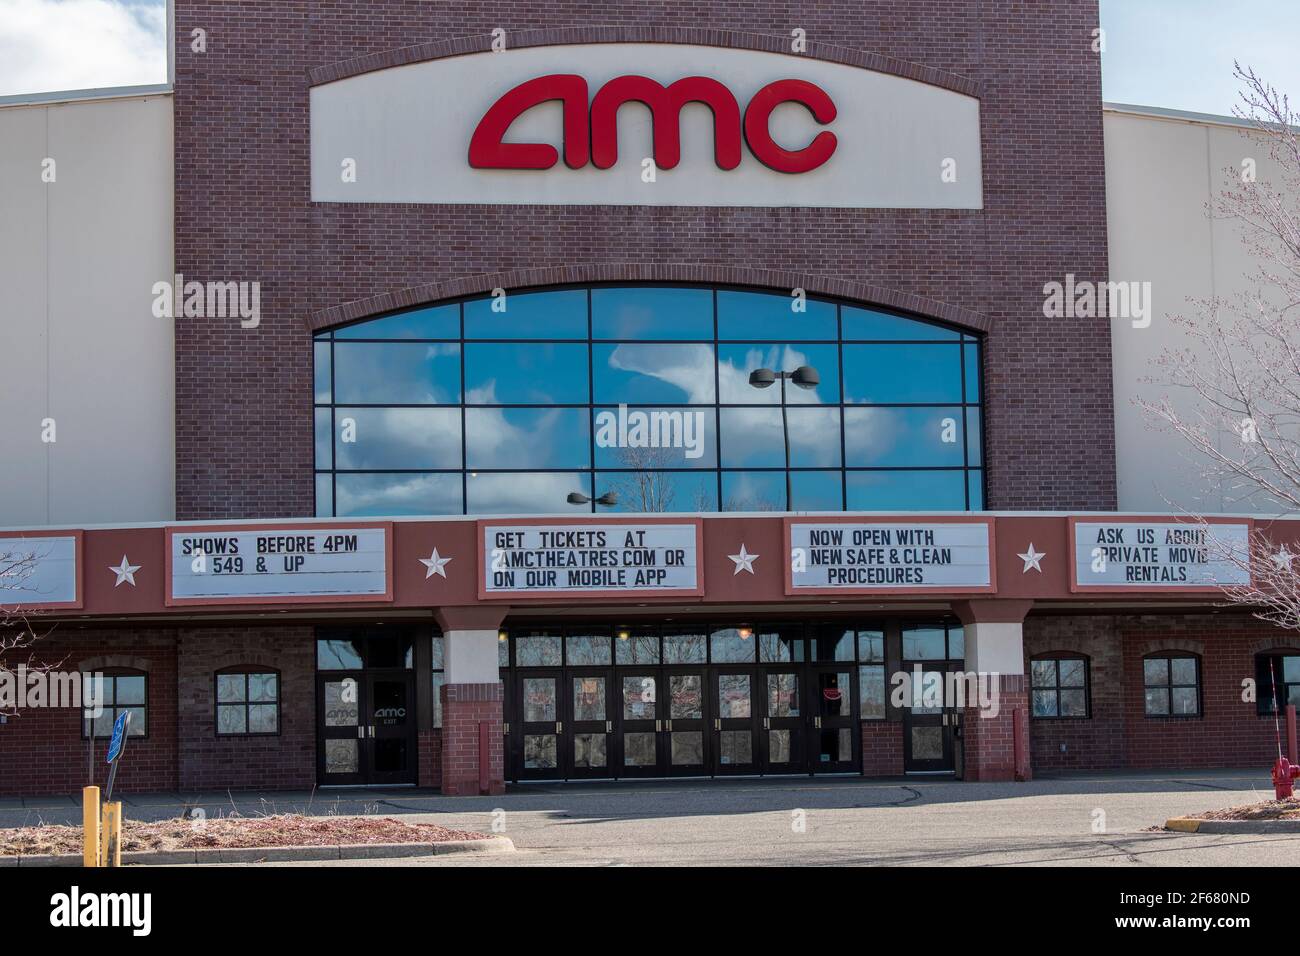 Amc Movie Theater High Resolution Stock Photography and Images - Alamy